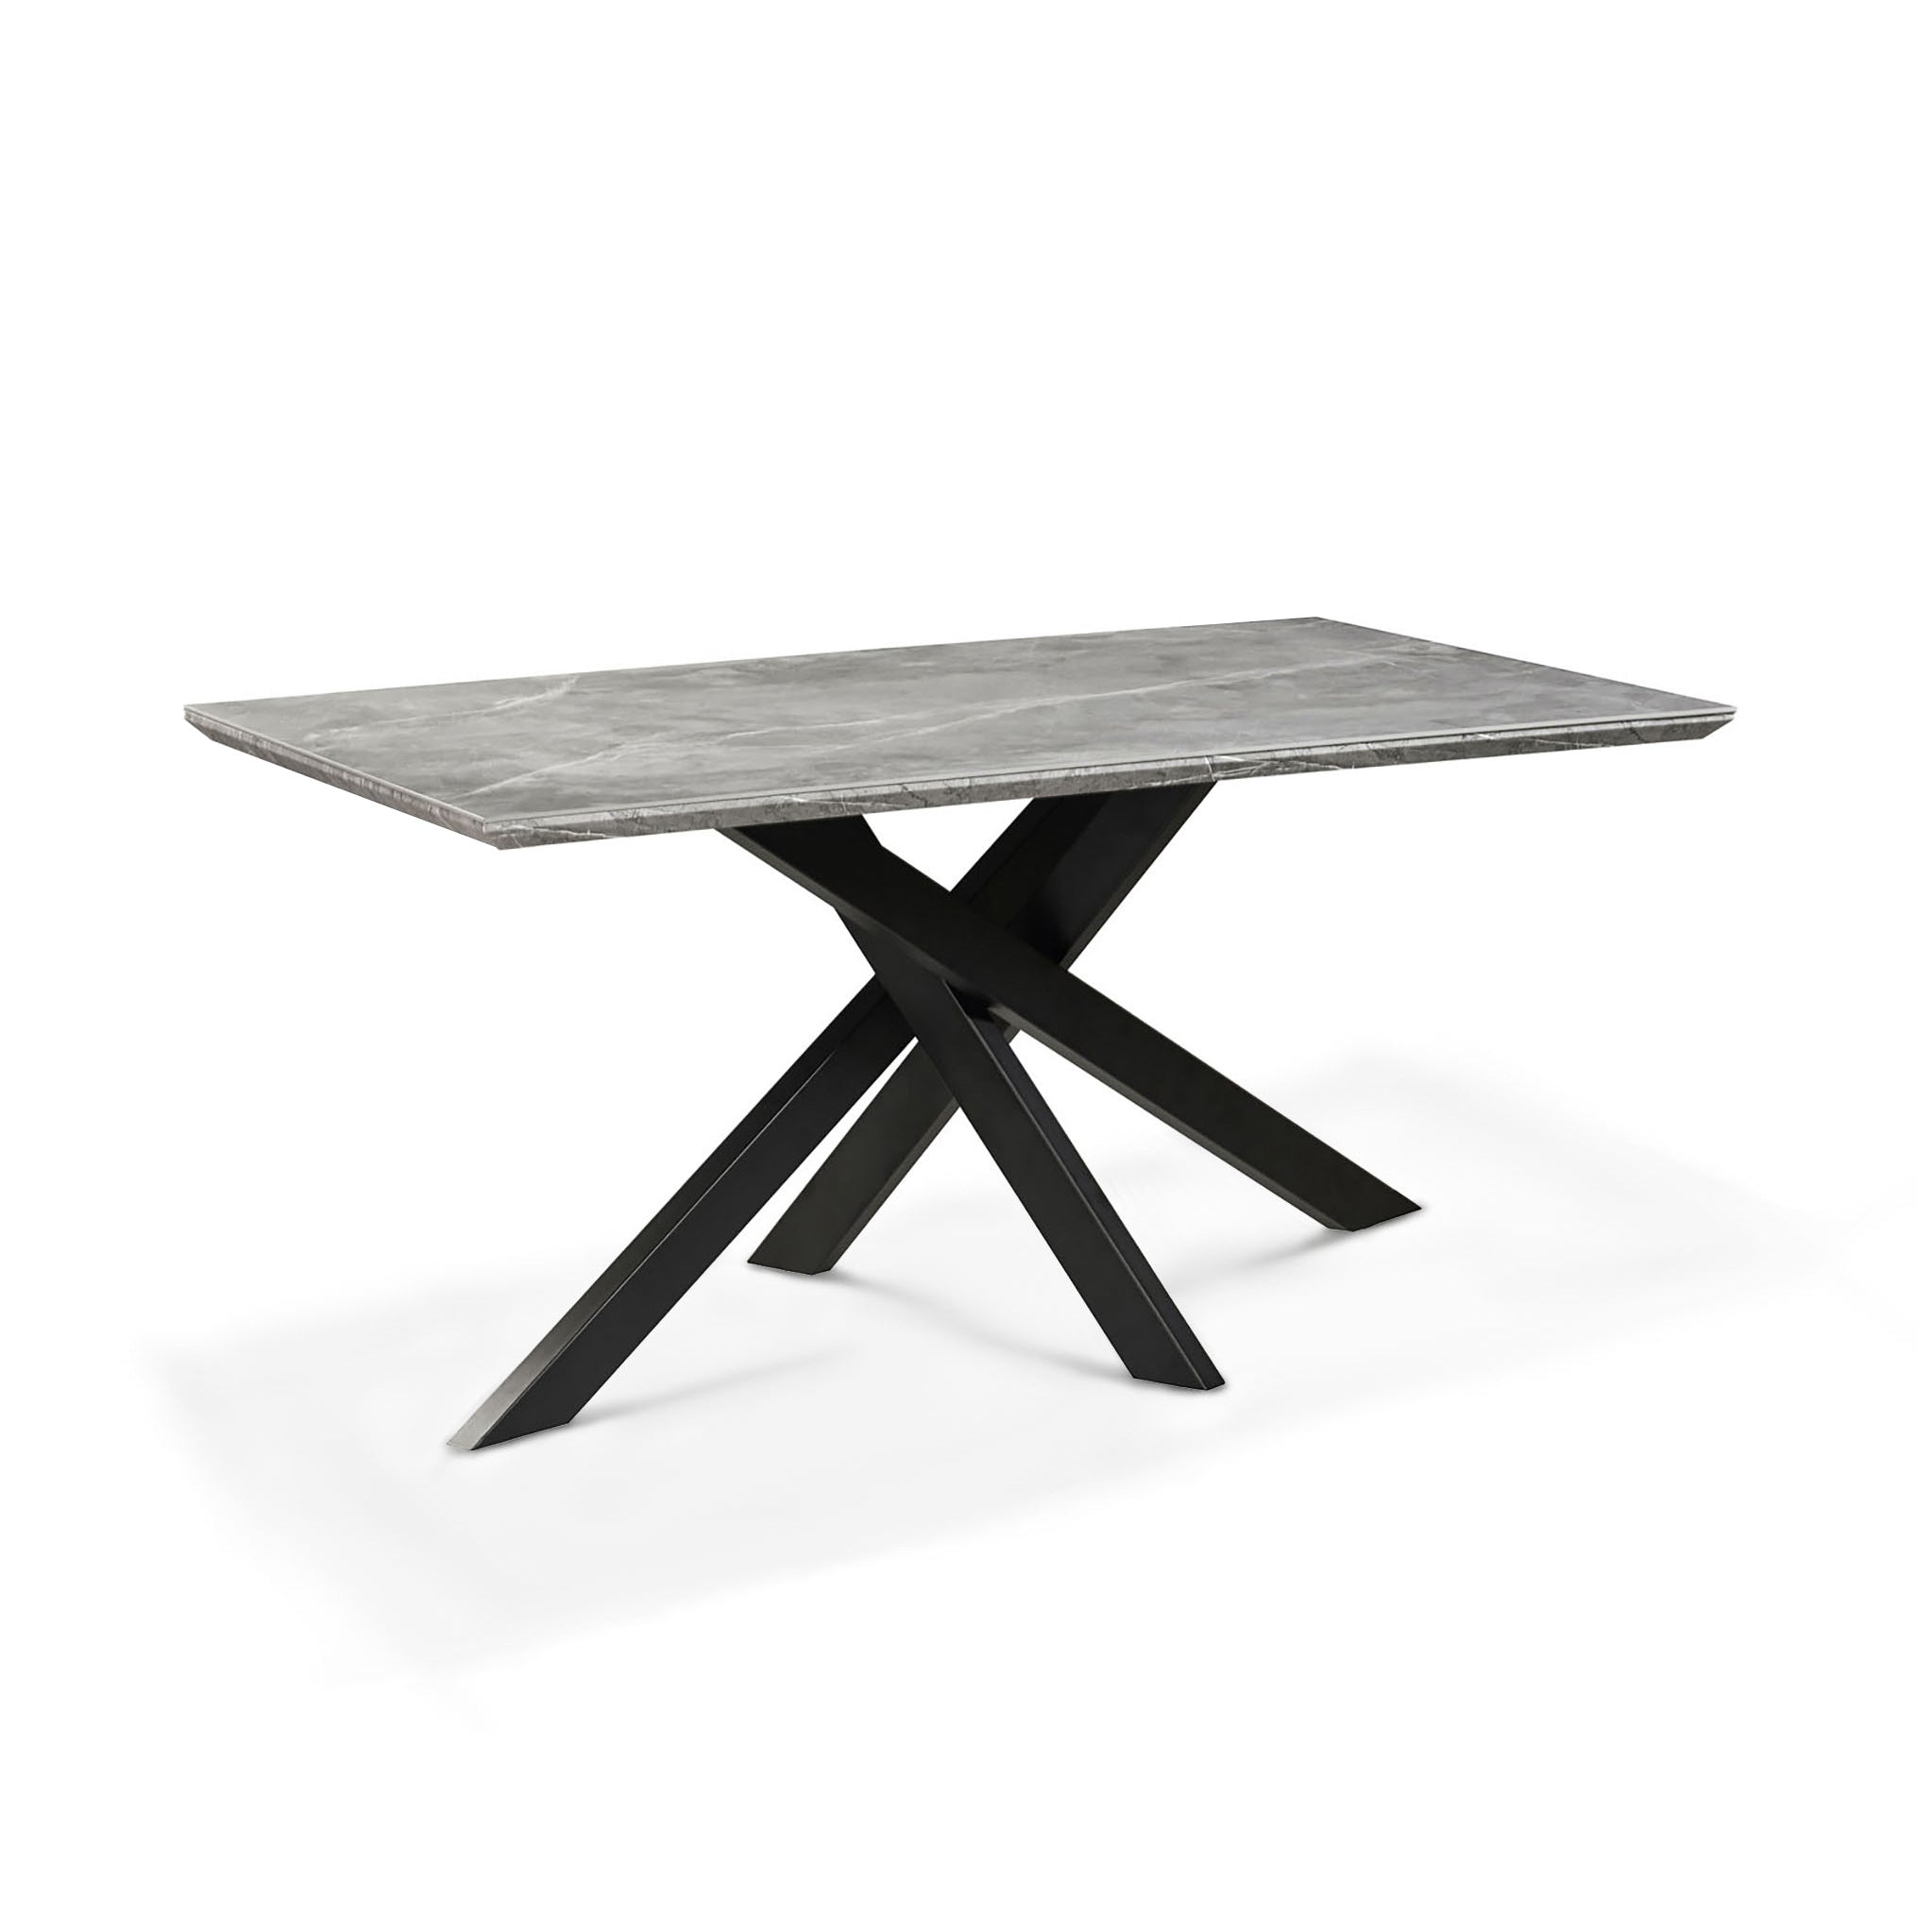 Henley 140cm Dining Table Grey Sintered Stone Seats 6 Roseland